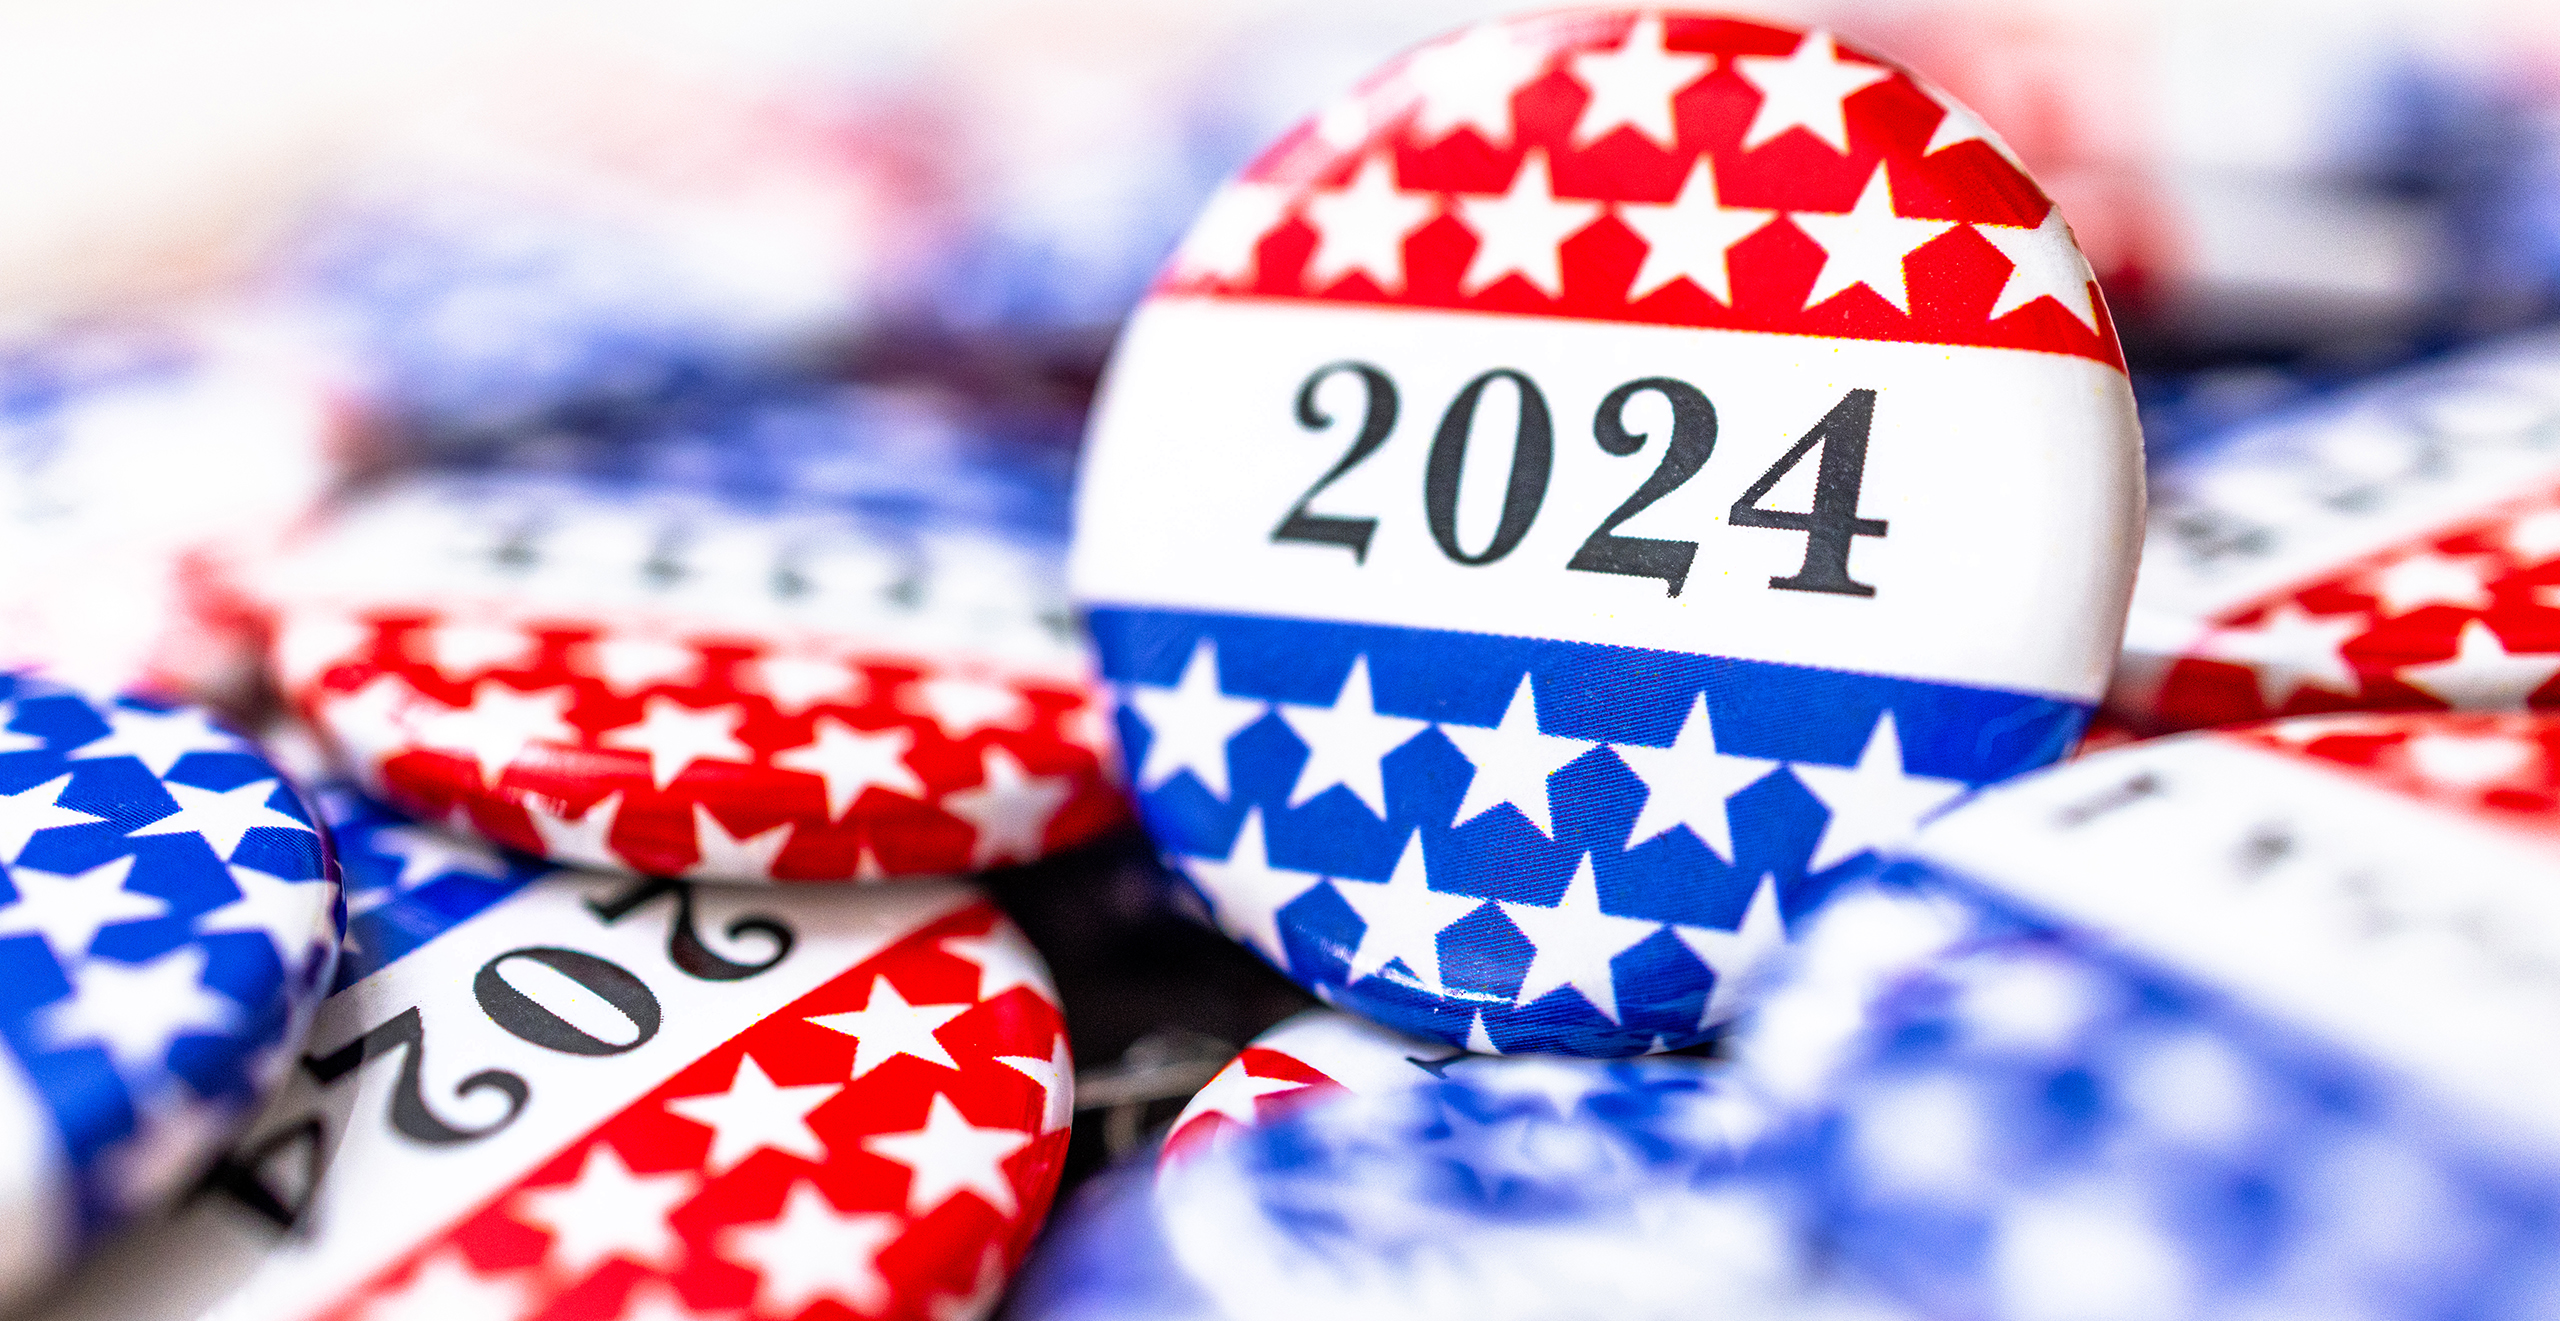 election year buttons with the year 2024